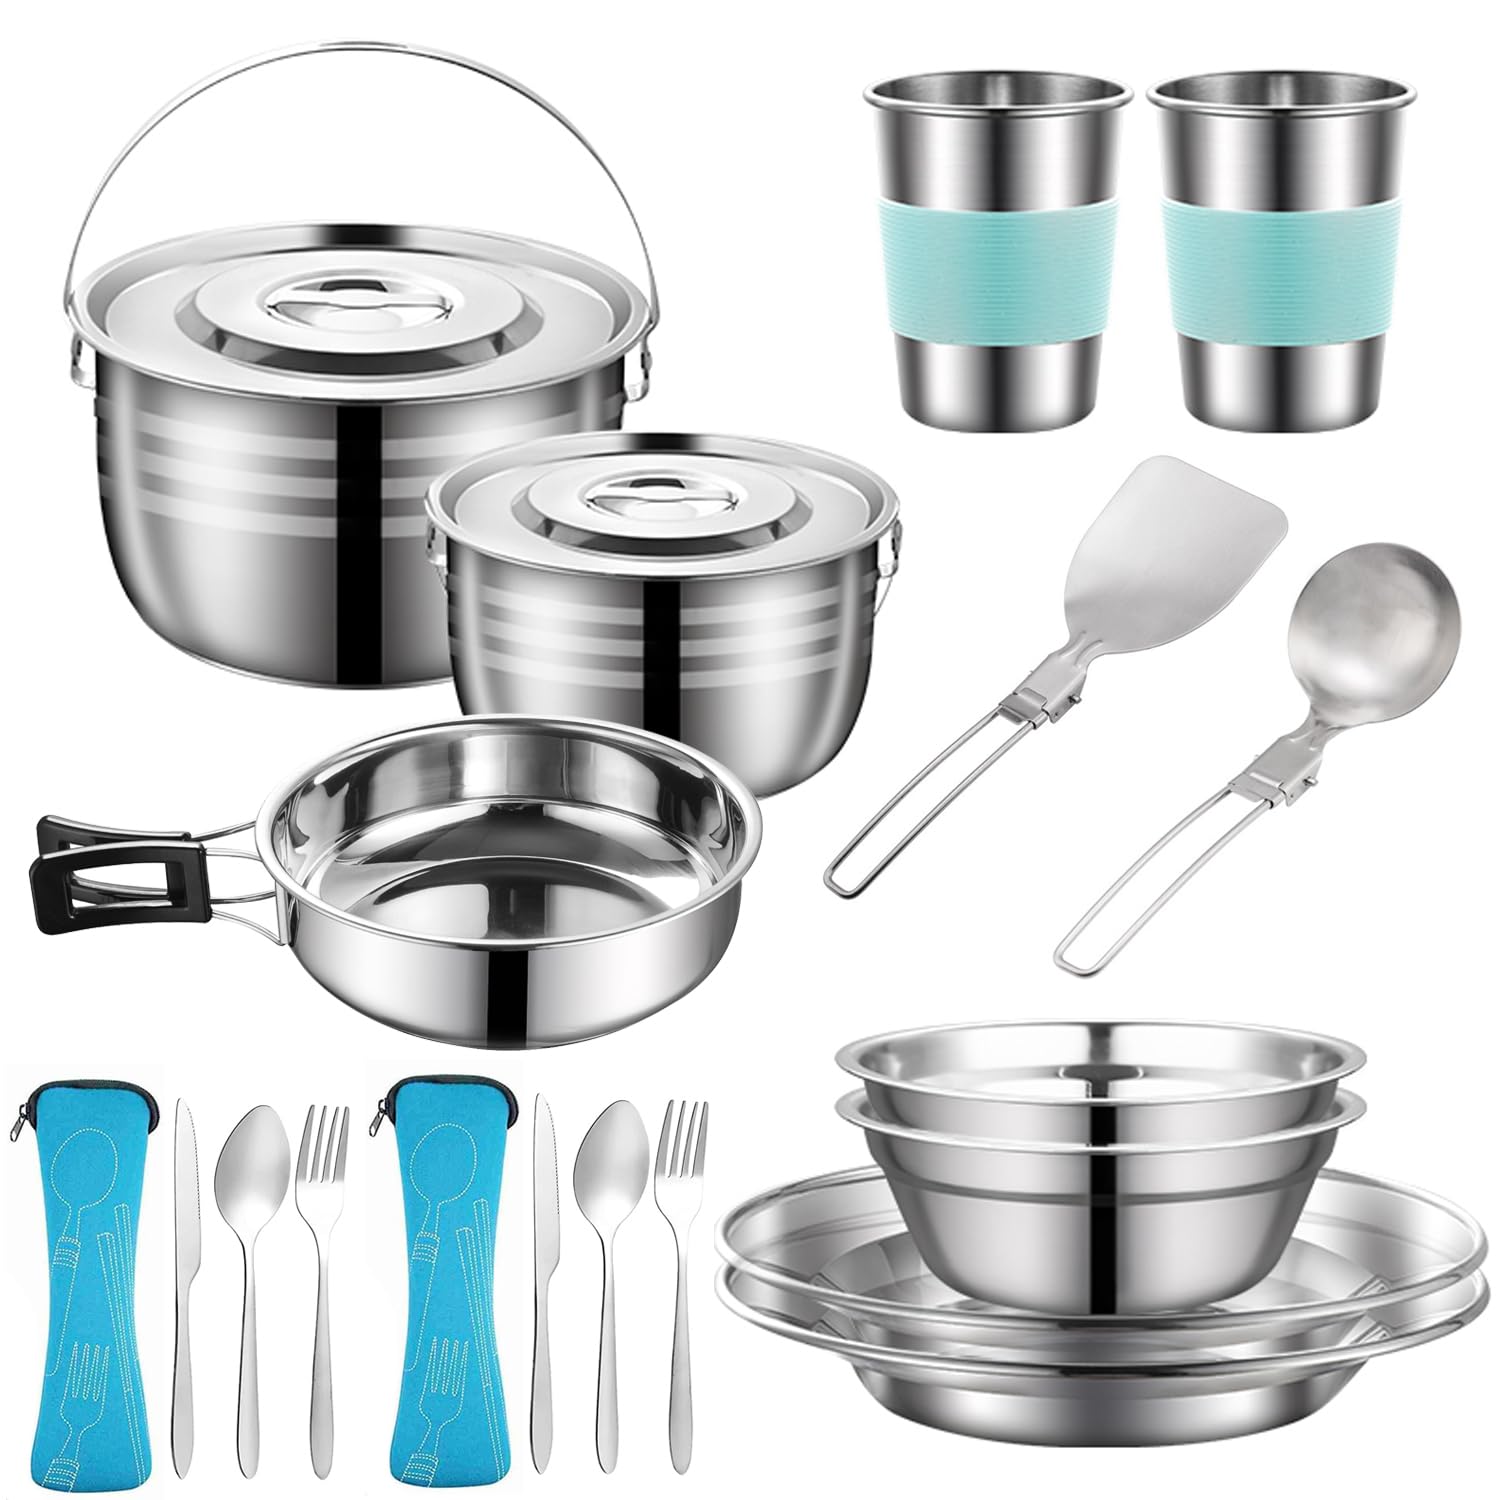 Camping Cookware Mess Kit304 Stainless Steel Camping Cooking SetCamping Pot and Pan Set with Blows Cups Plates Forks Knives